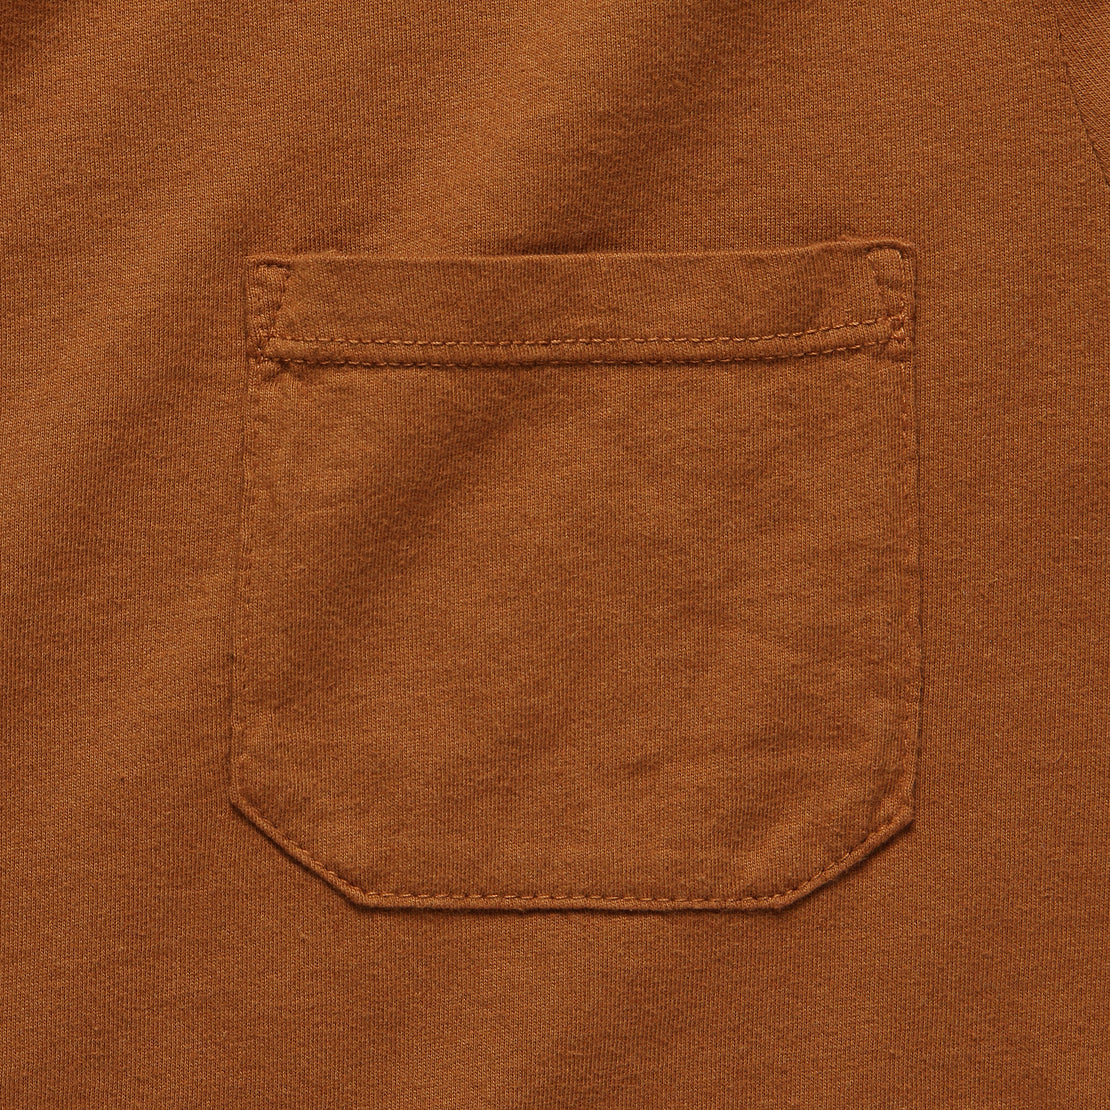 Boxy Crop Tee - Tobacco - Richer Poorer - STAG Provisions - W - Tops - S/S Tee